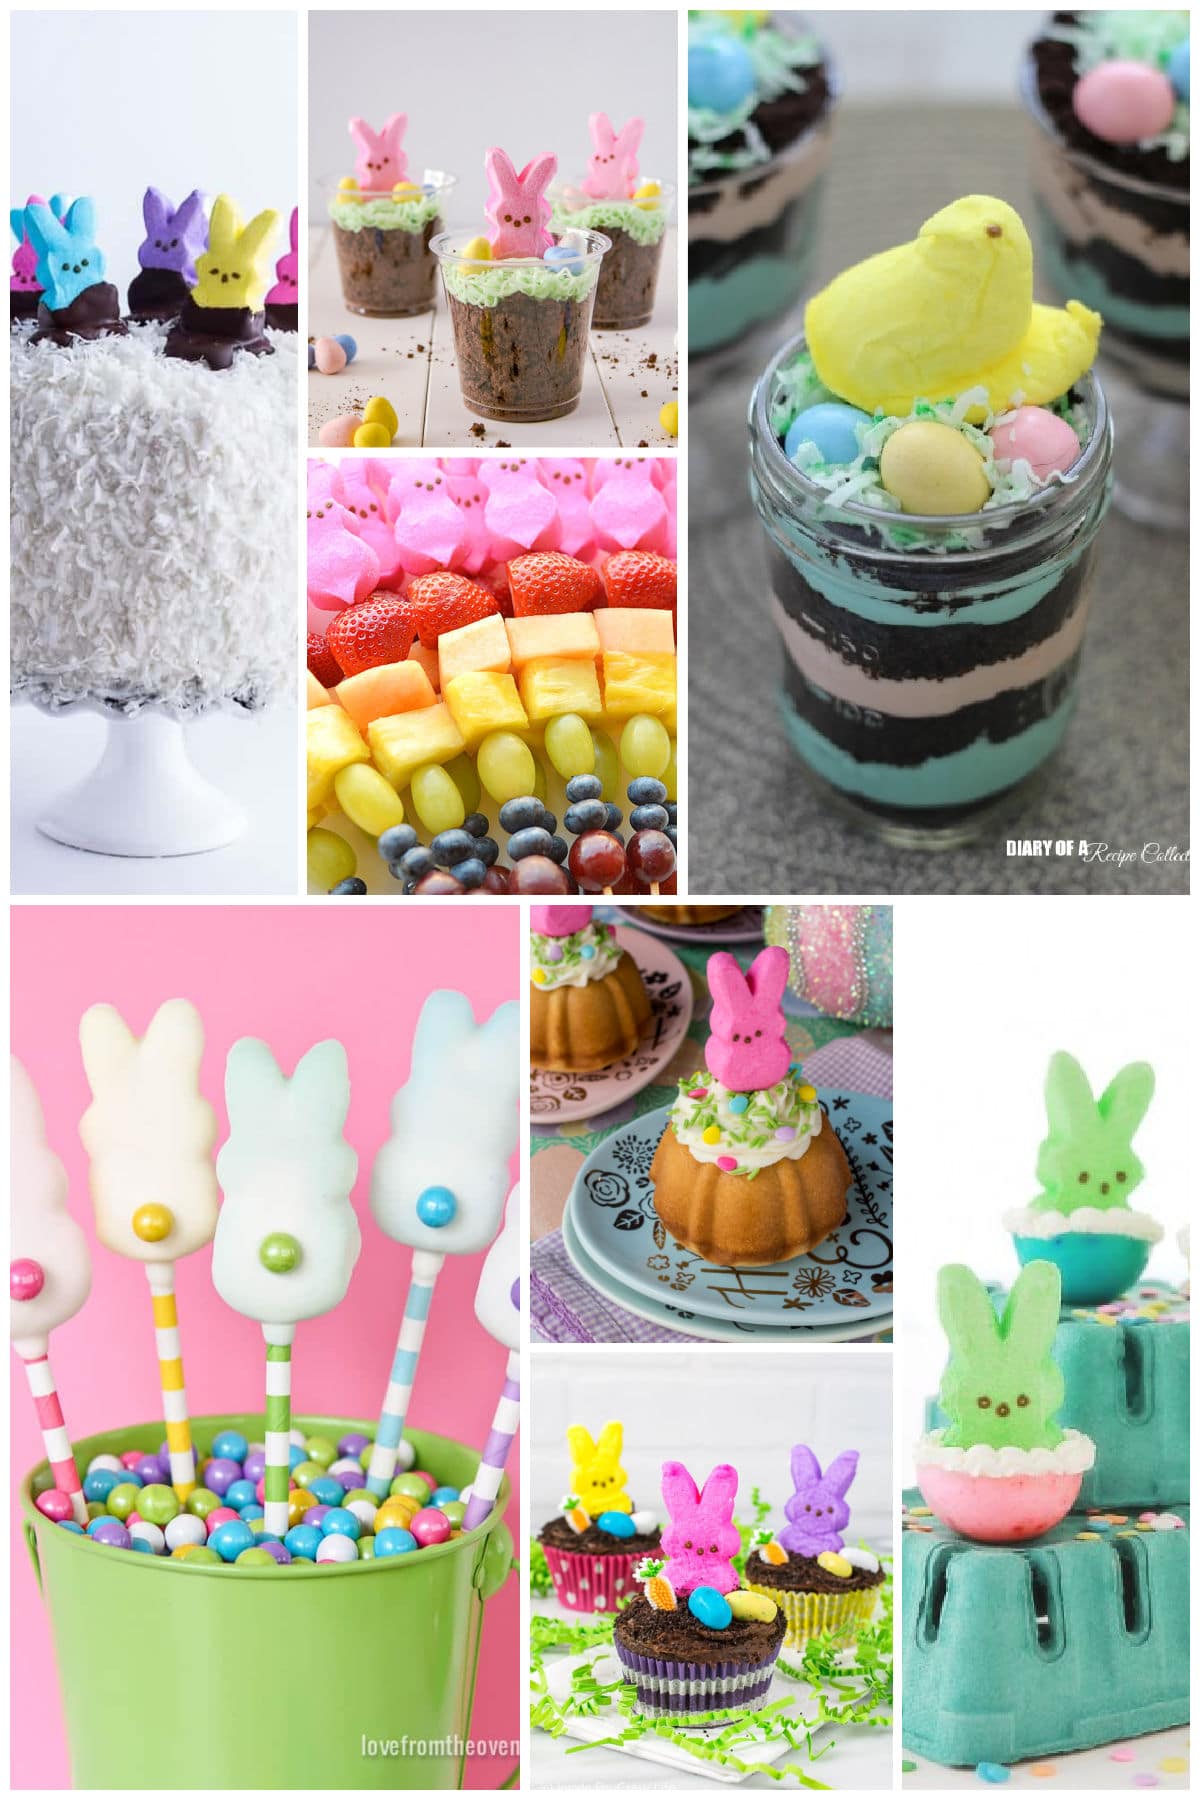 A group of recipes made with peeps like fruit kabobs, pudding cups and cupcakes.